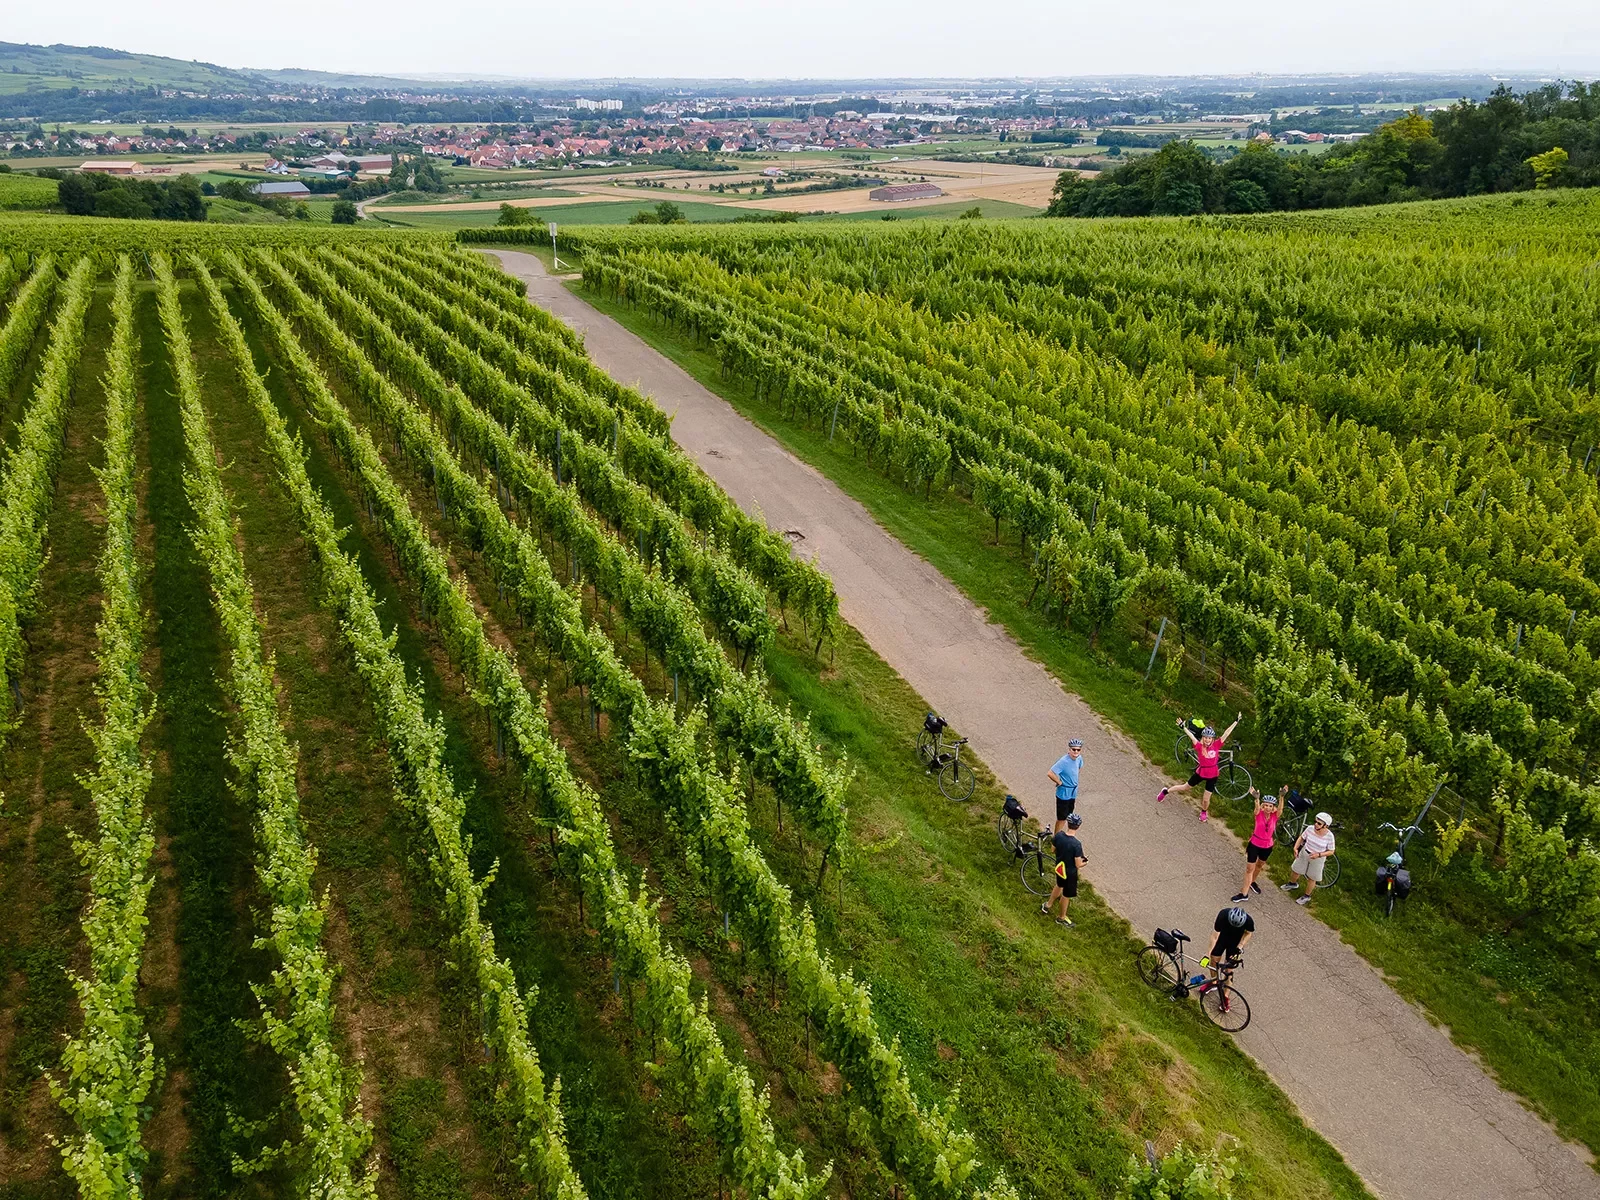 Backroads Guests Stopping in Vineyard in Alsace